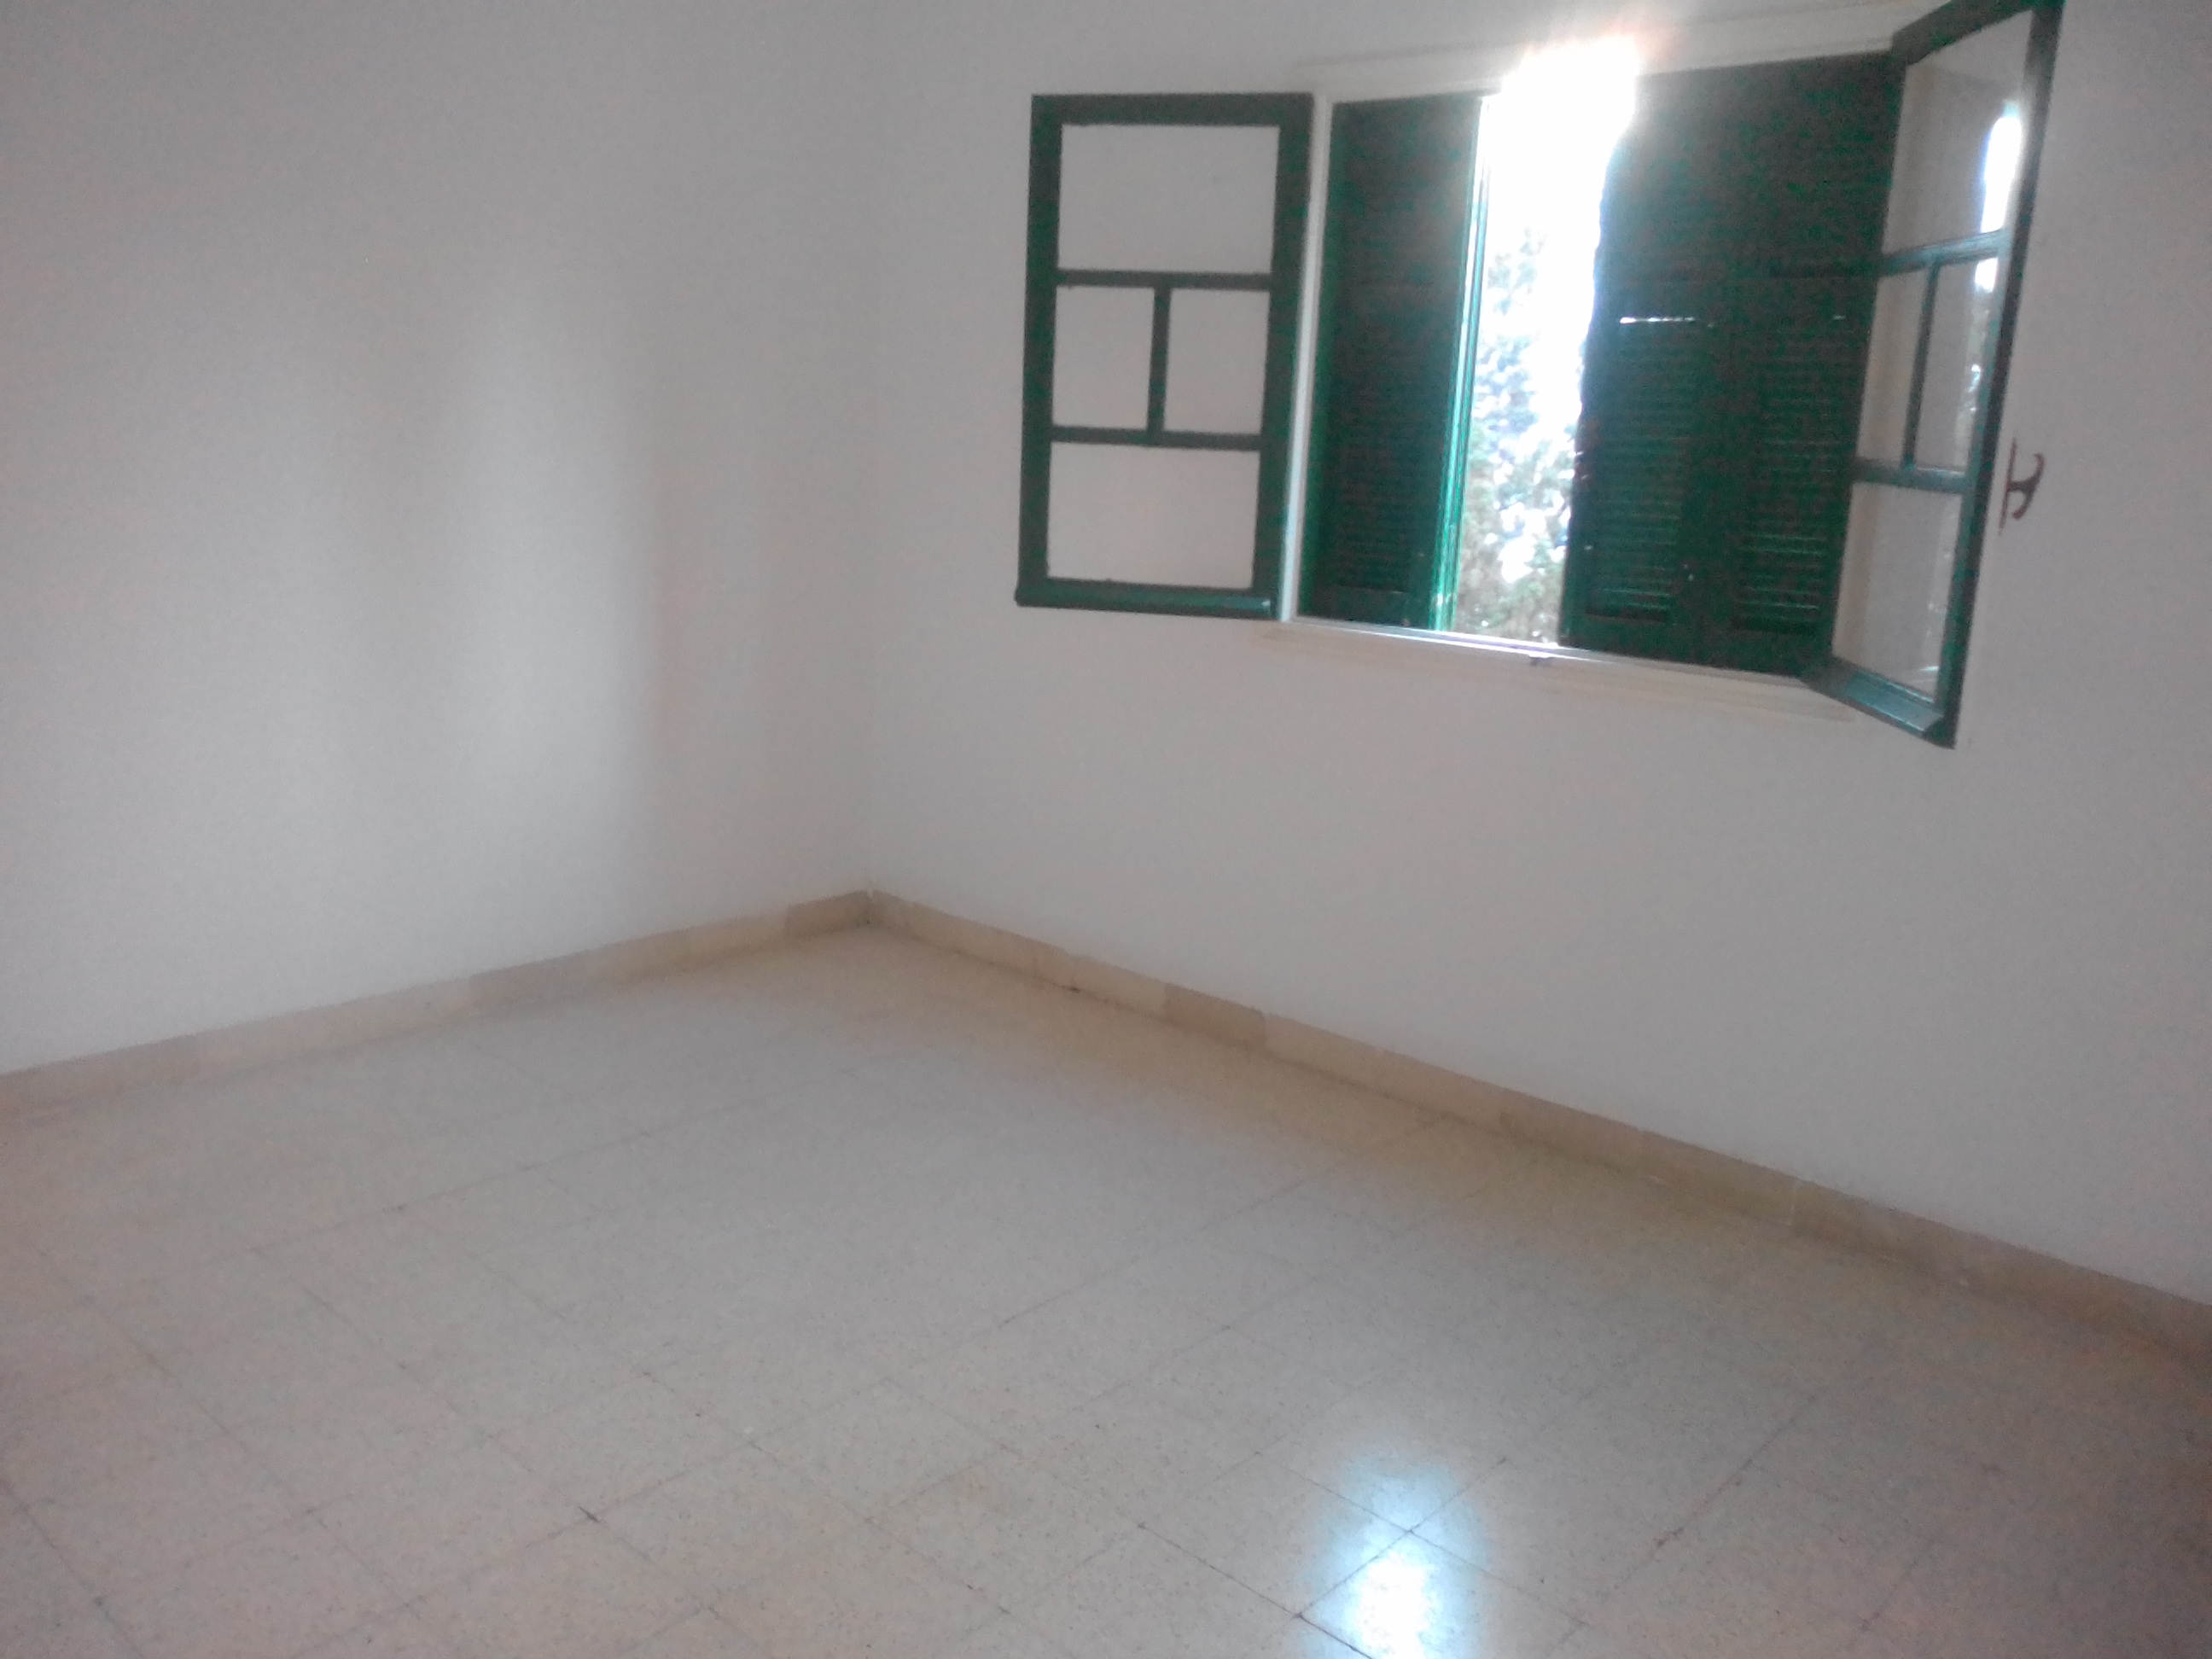 El Mourouj Residence Chourouk 1 Vente Appart. 3 pices Appartement a mourouj 3